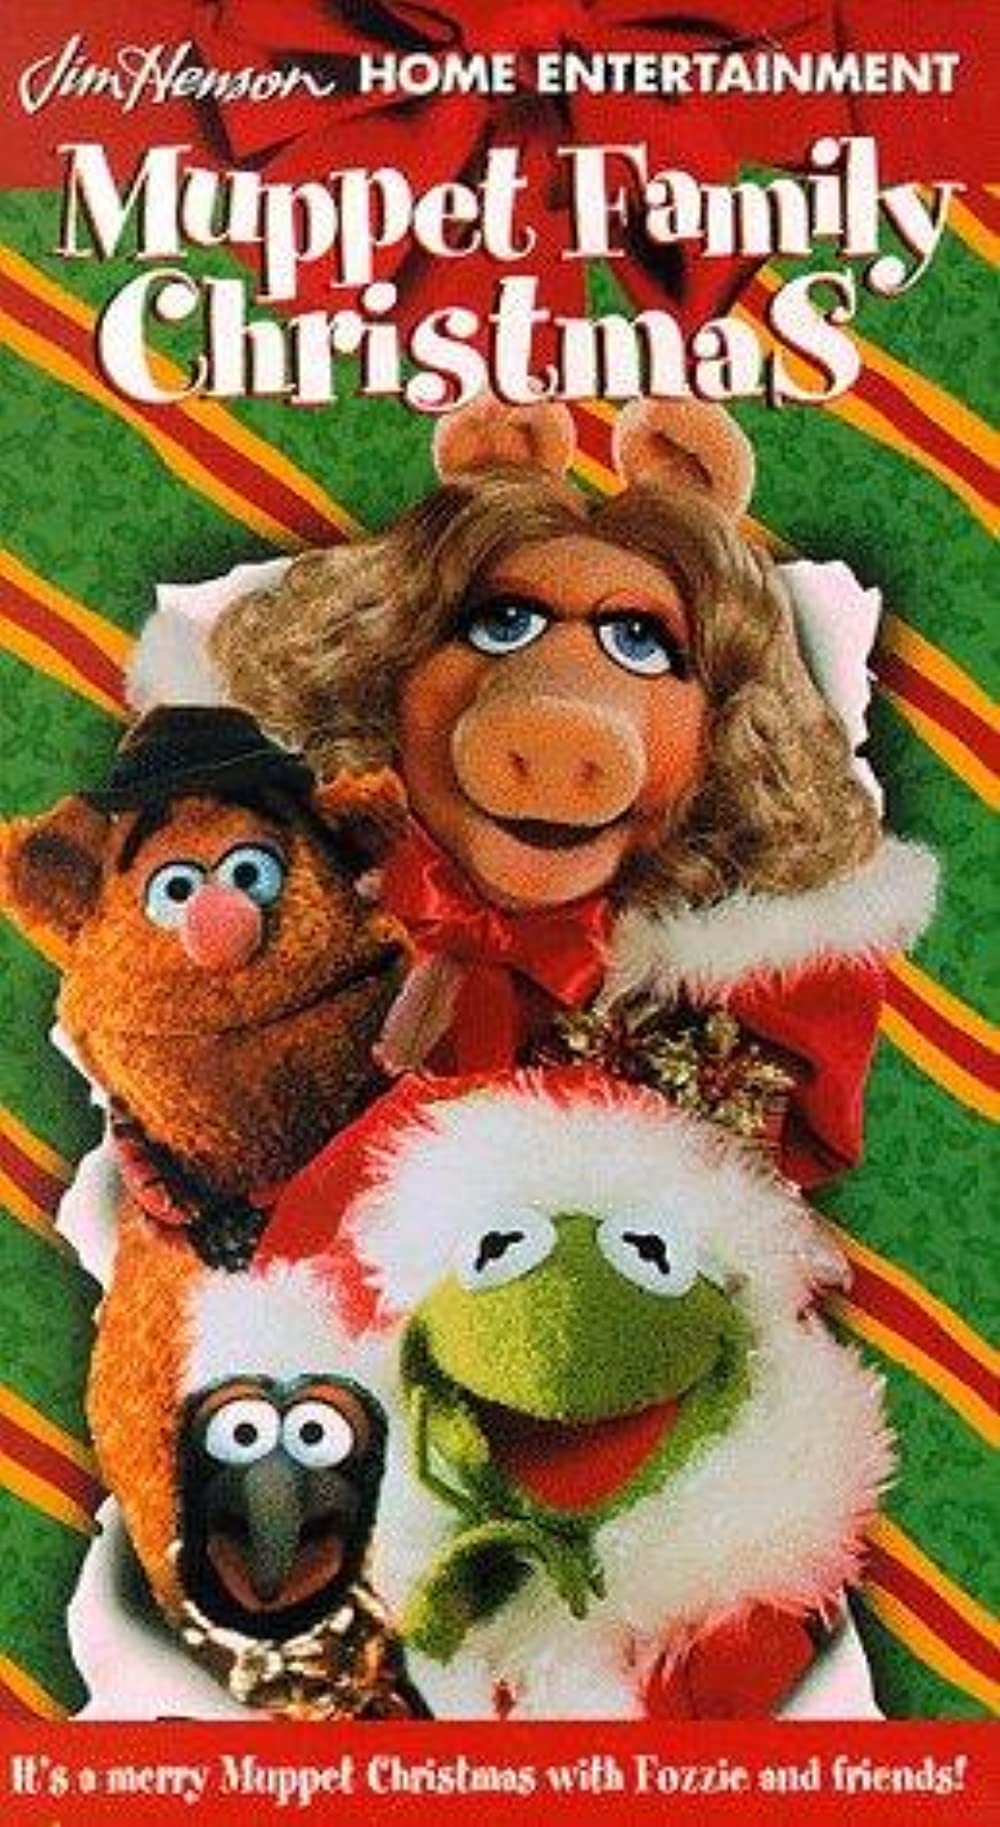 Muppet Family Christmas, A